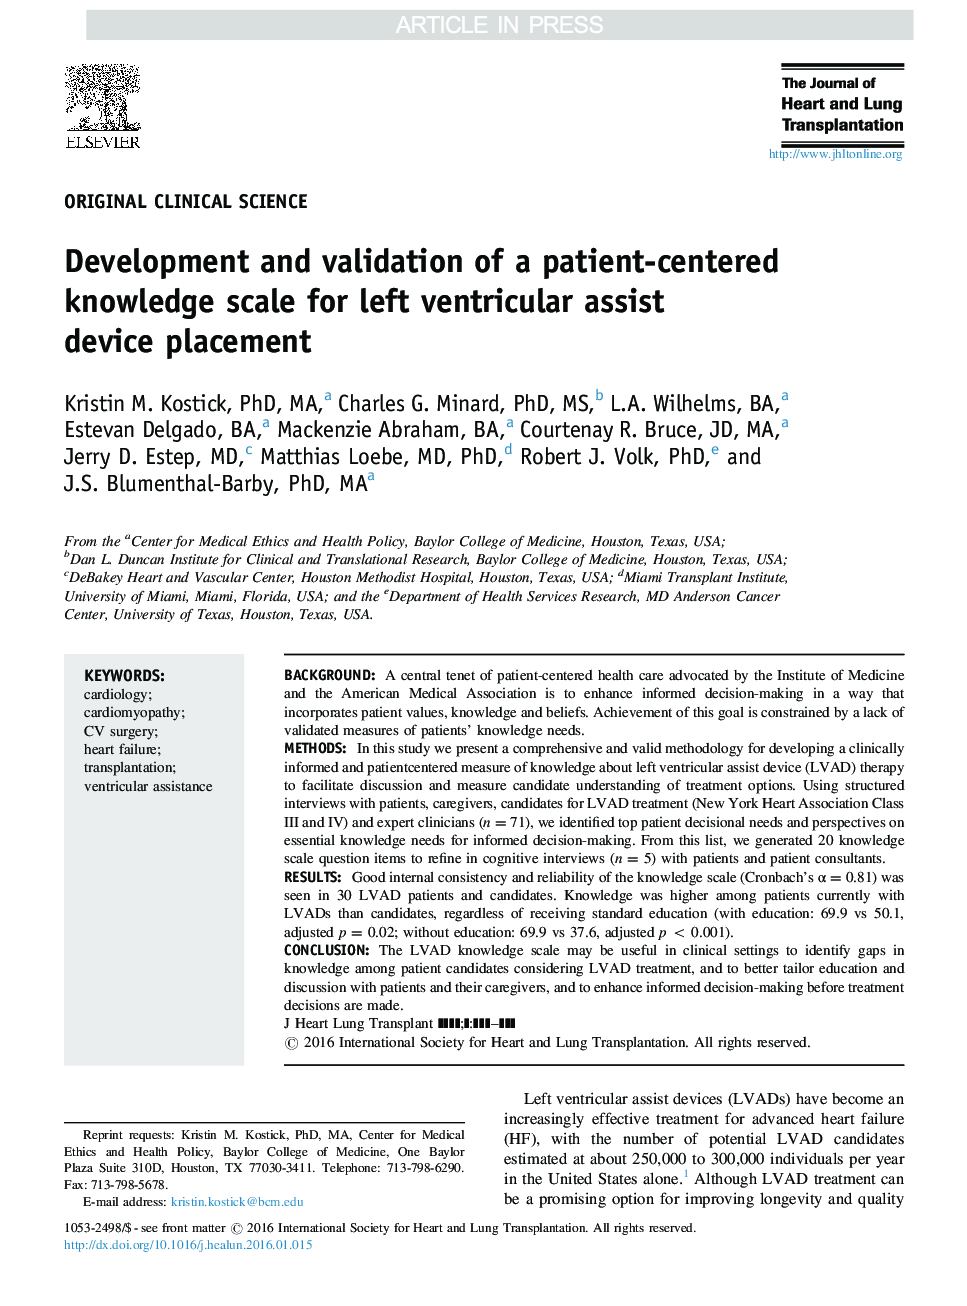 Development and validation of a patient-centered knowledge scale for left ventricular assist device placement